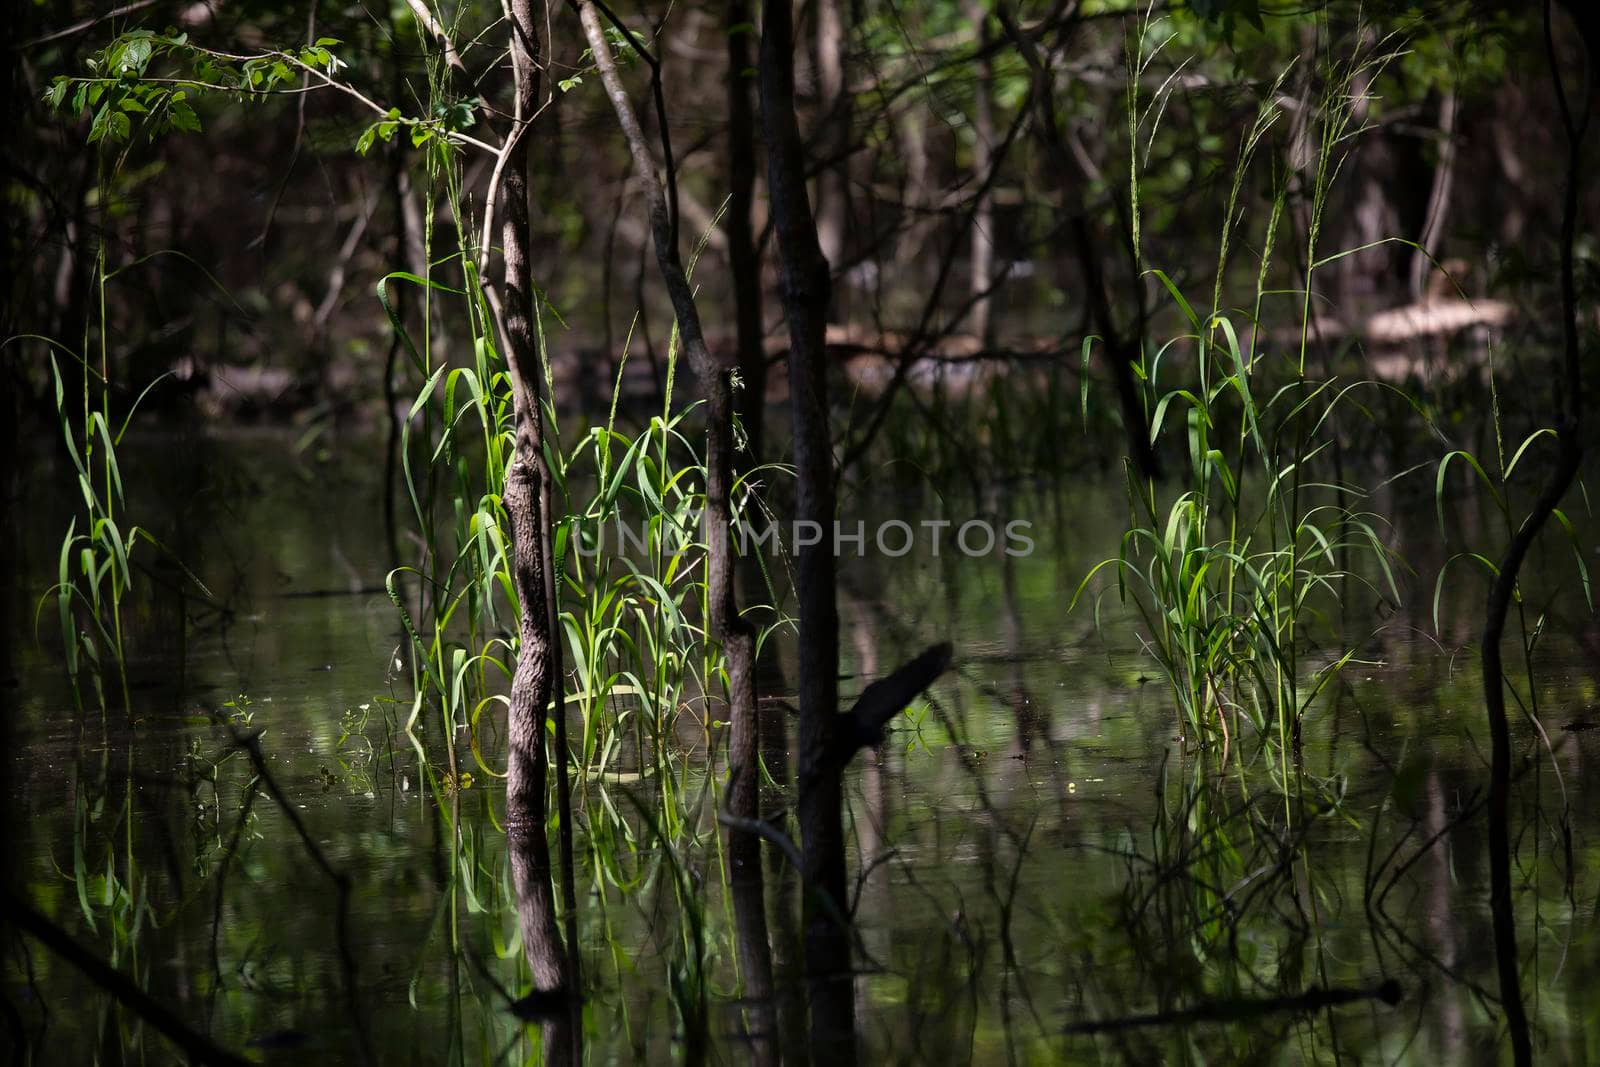 Tall grass and small trees growing in a swamp